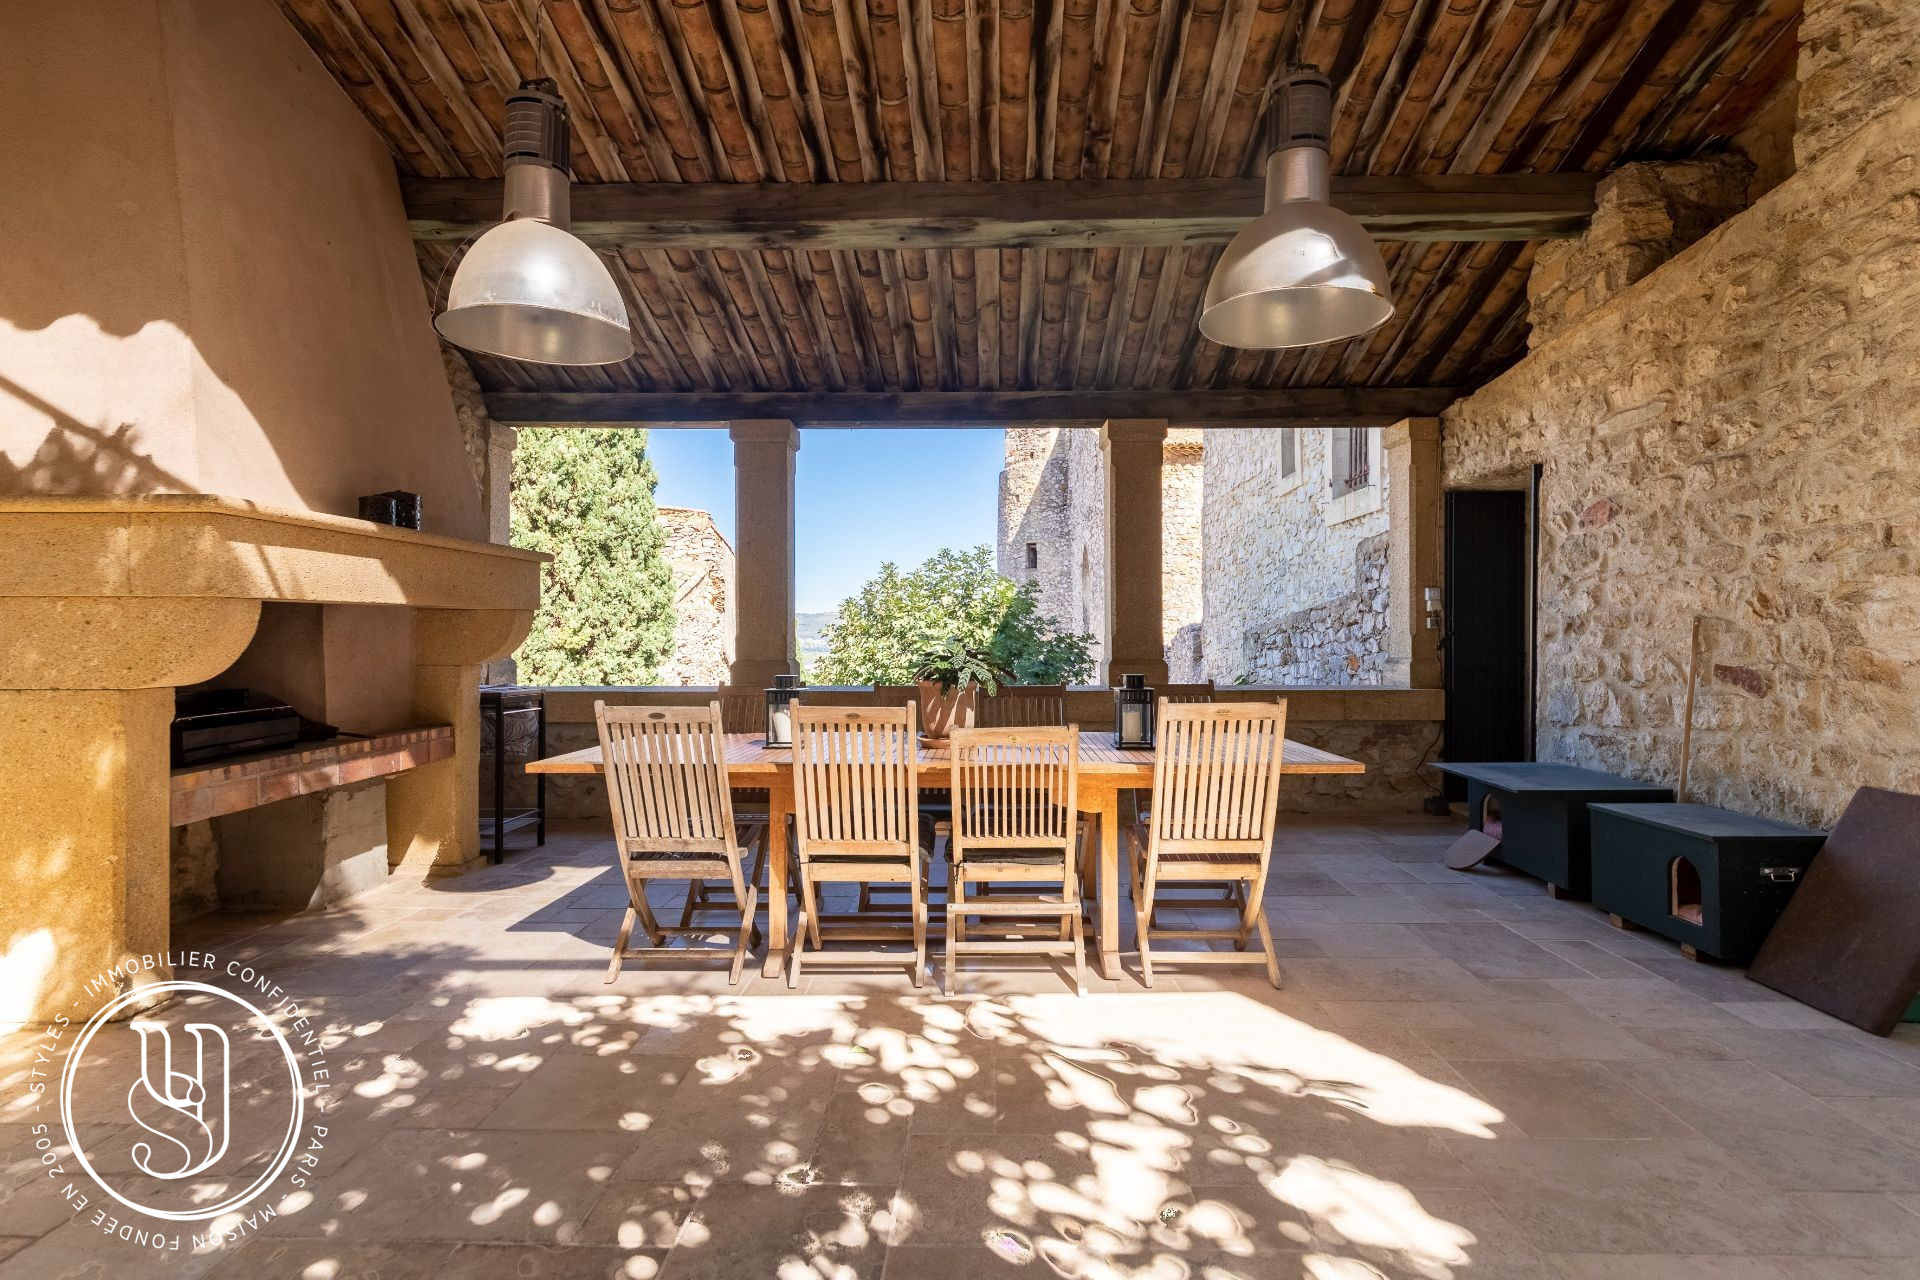 Uzes - surroundings, sold by S T Y LE S, a beautiful, refined and ele - image 10